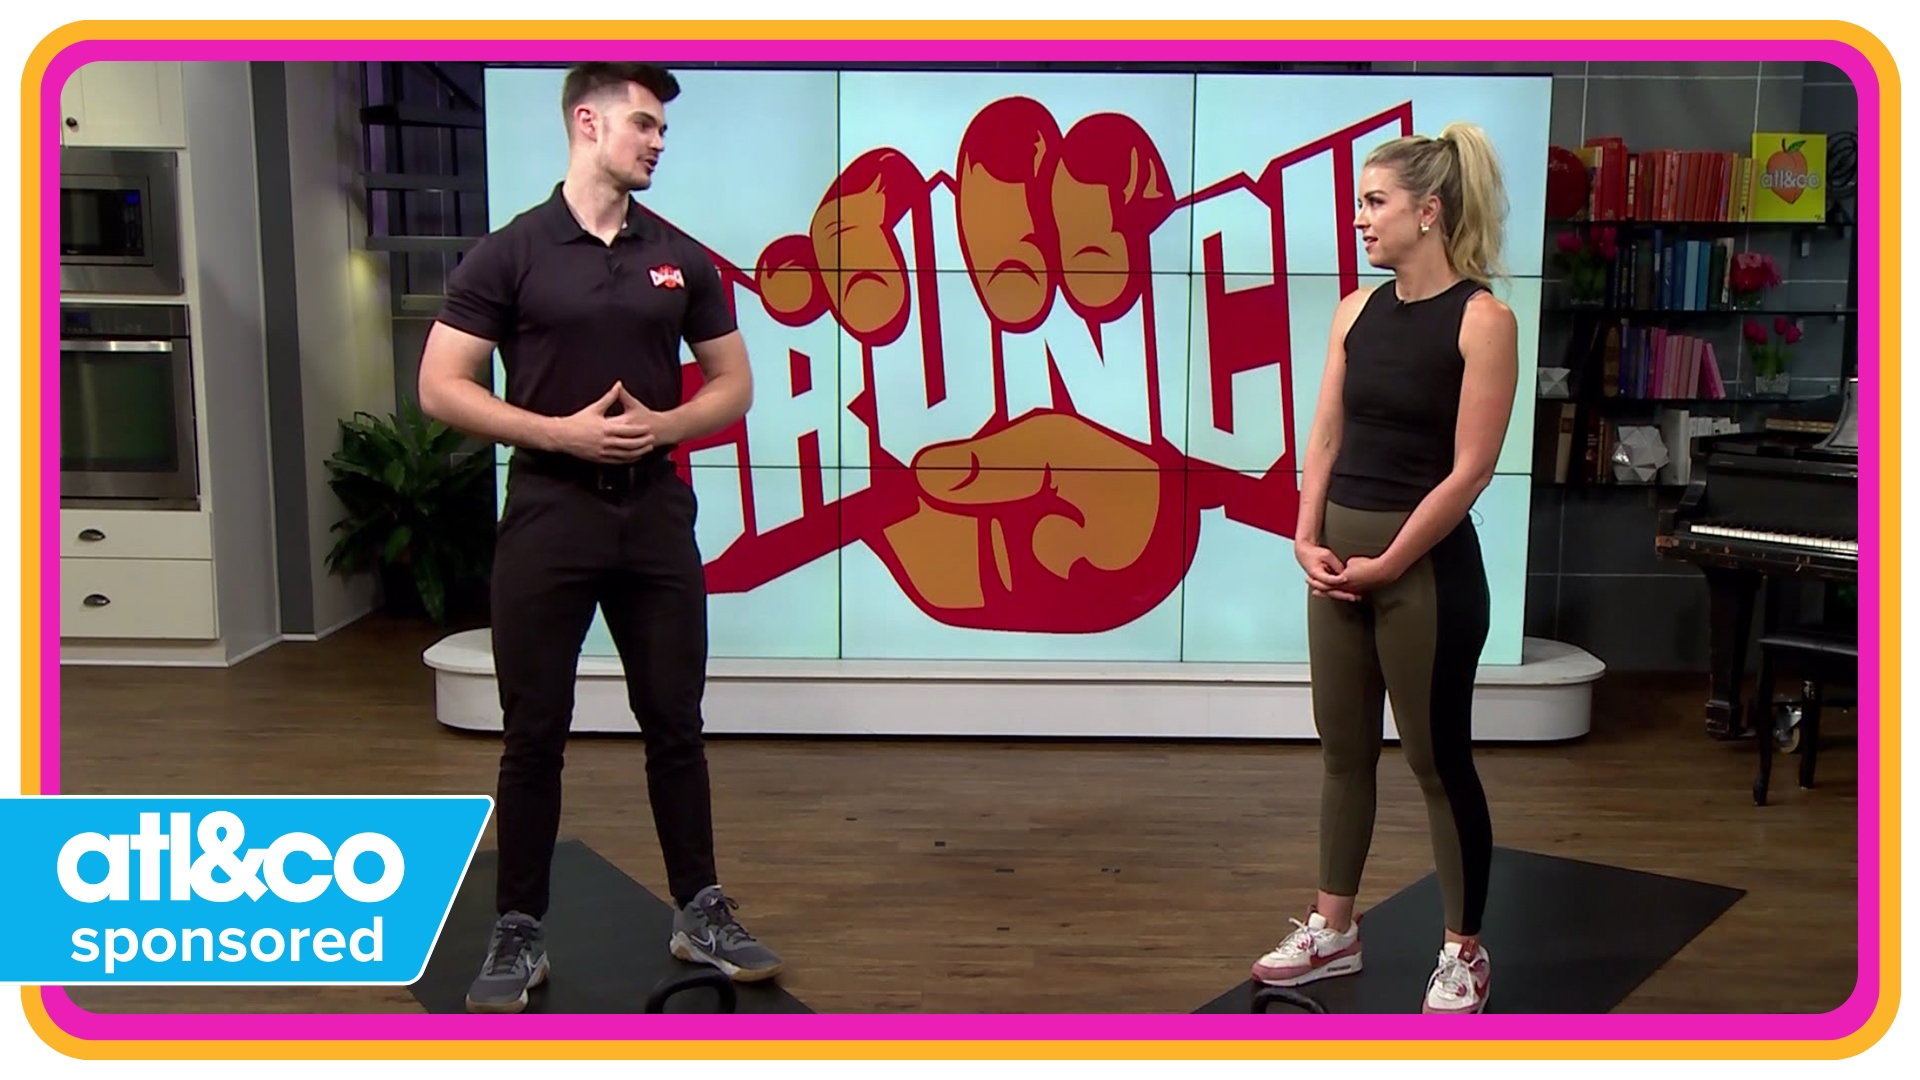 Crunch shows us how dads can get an efficient workout in by involving the whole family. | PAID CONTENT